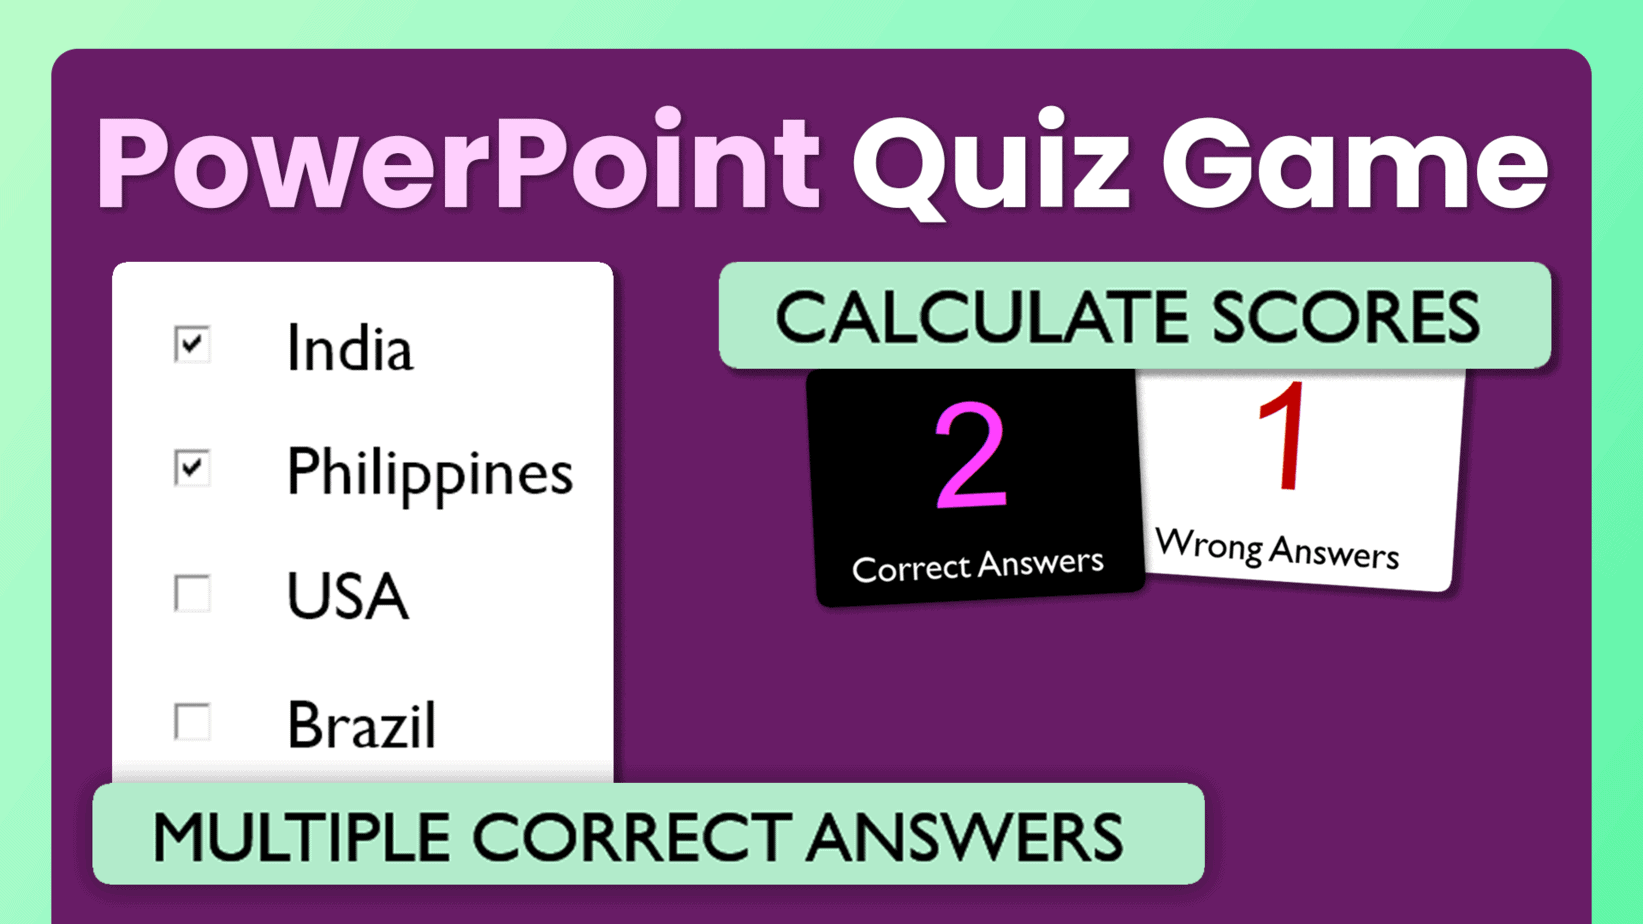 PPT Quiz Game with Multiple Correct Answers - PowerPoint Quiz Game with Multiple Correct Answers